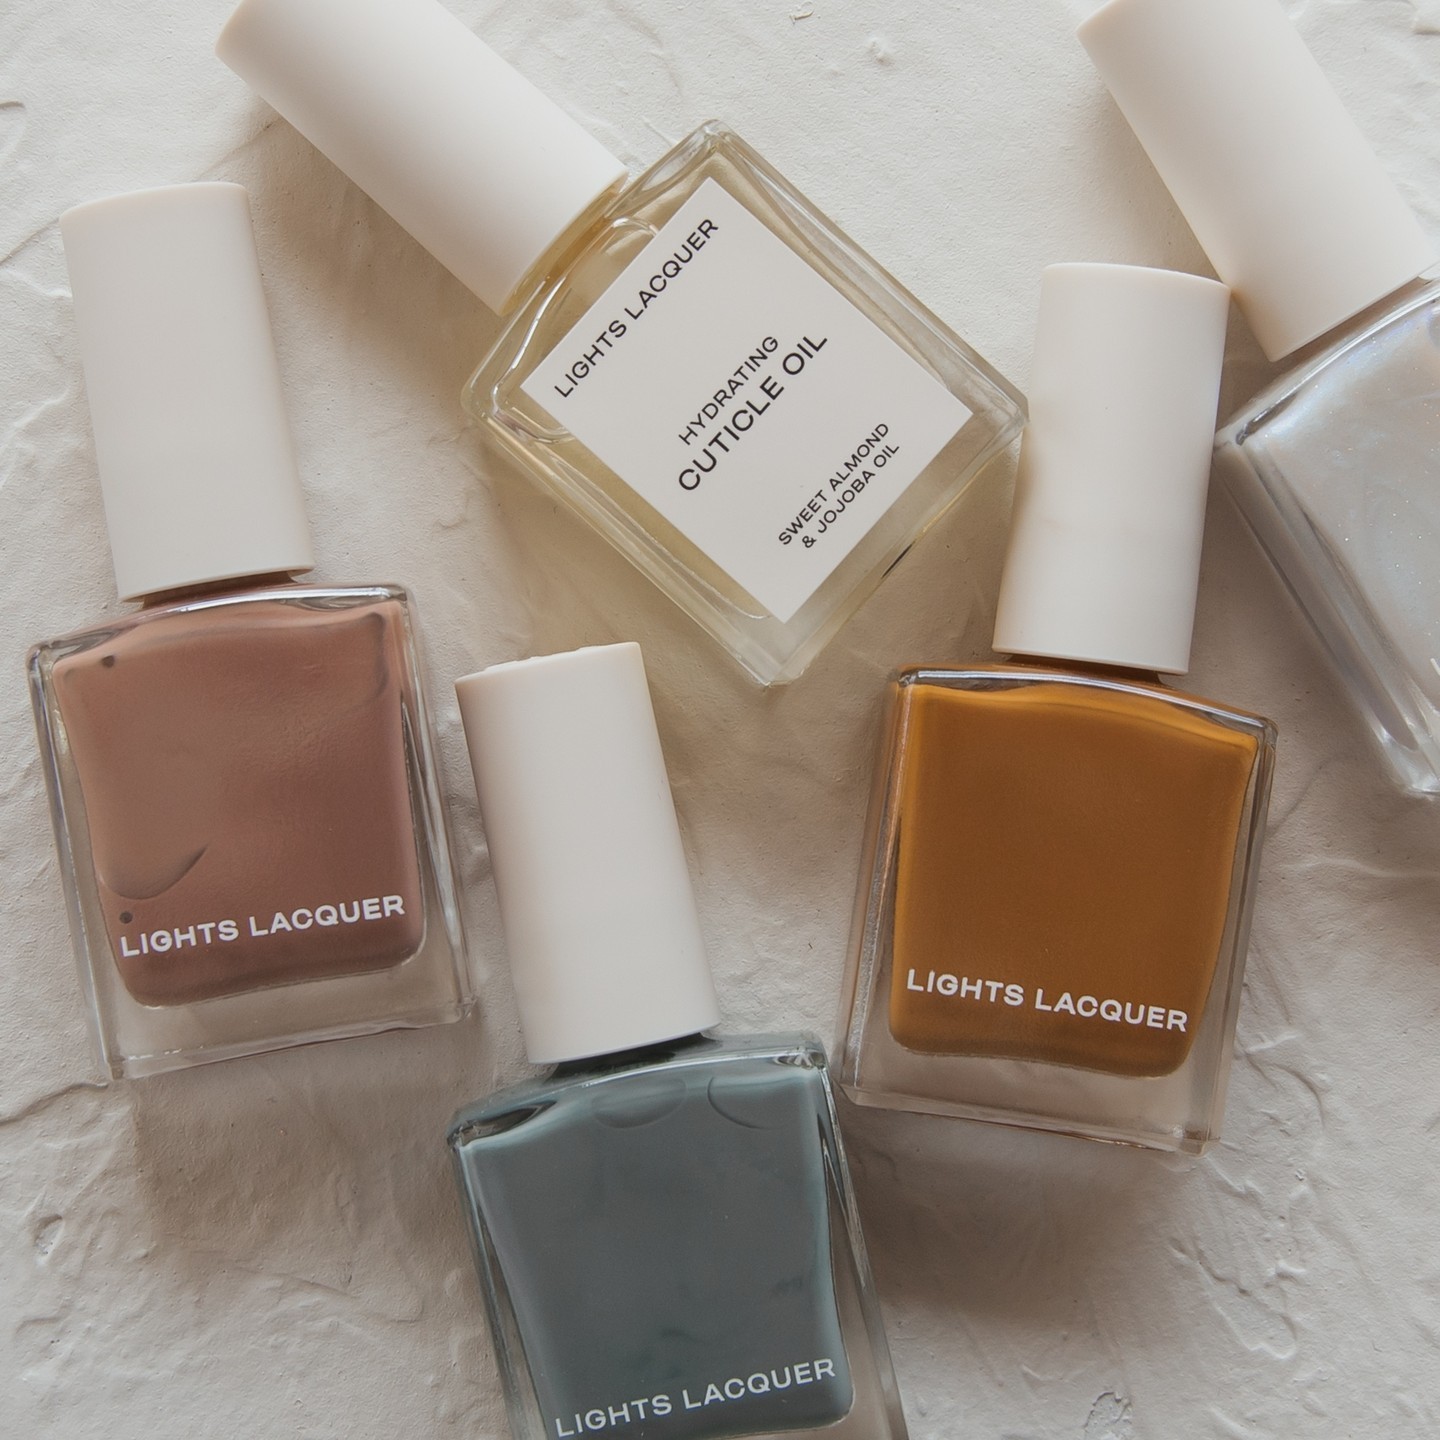 New in from @lightslacquer ✨ ⁠
⁠
I love their new bottles! Lyla is my go-to nude and Cold Turkey is my favorite toenail polish color. I'm also so happy to be reunited with my favorite fall shade- Caramello. ⁠
⁠
#lightslacquer